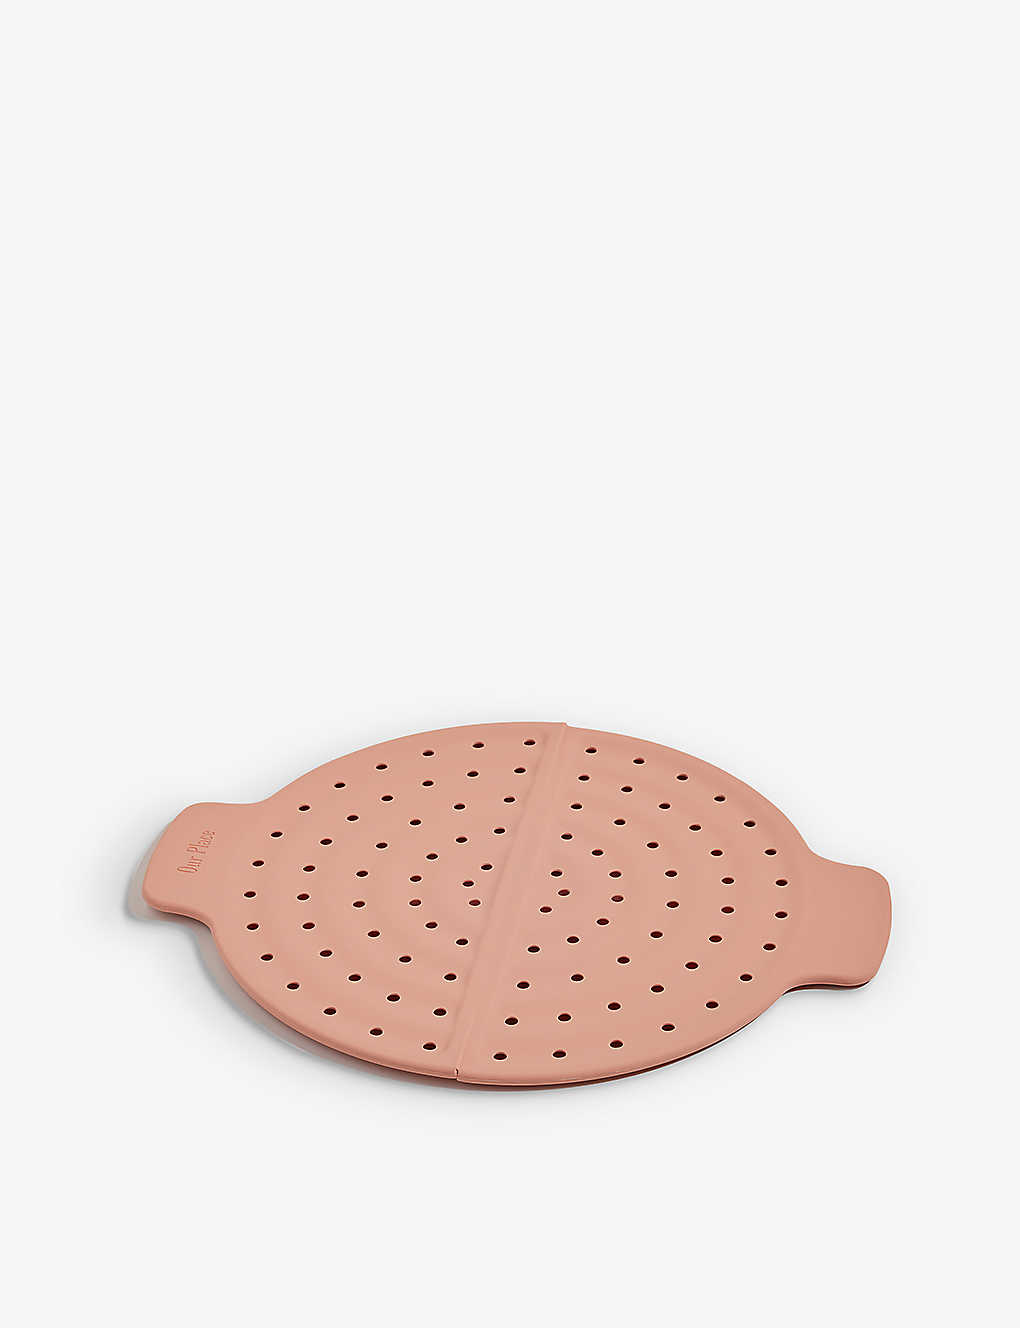 Our Place Spice Fearless Fry Perforated Silicone Pan